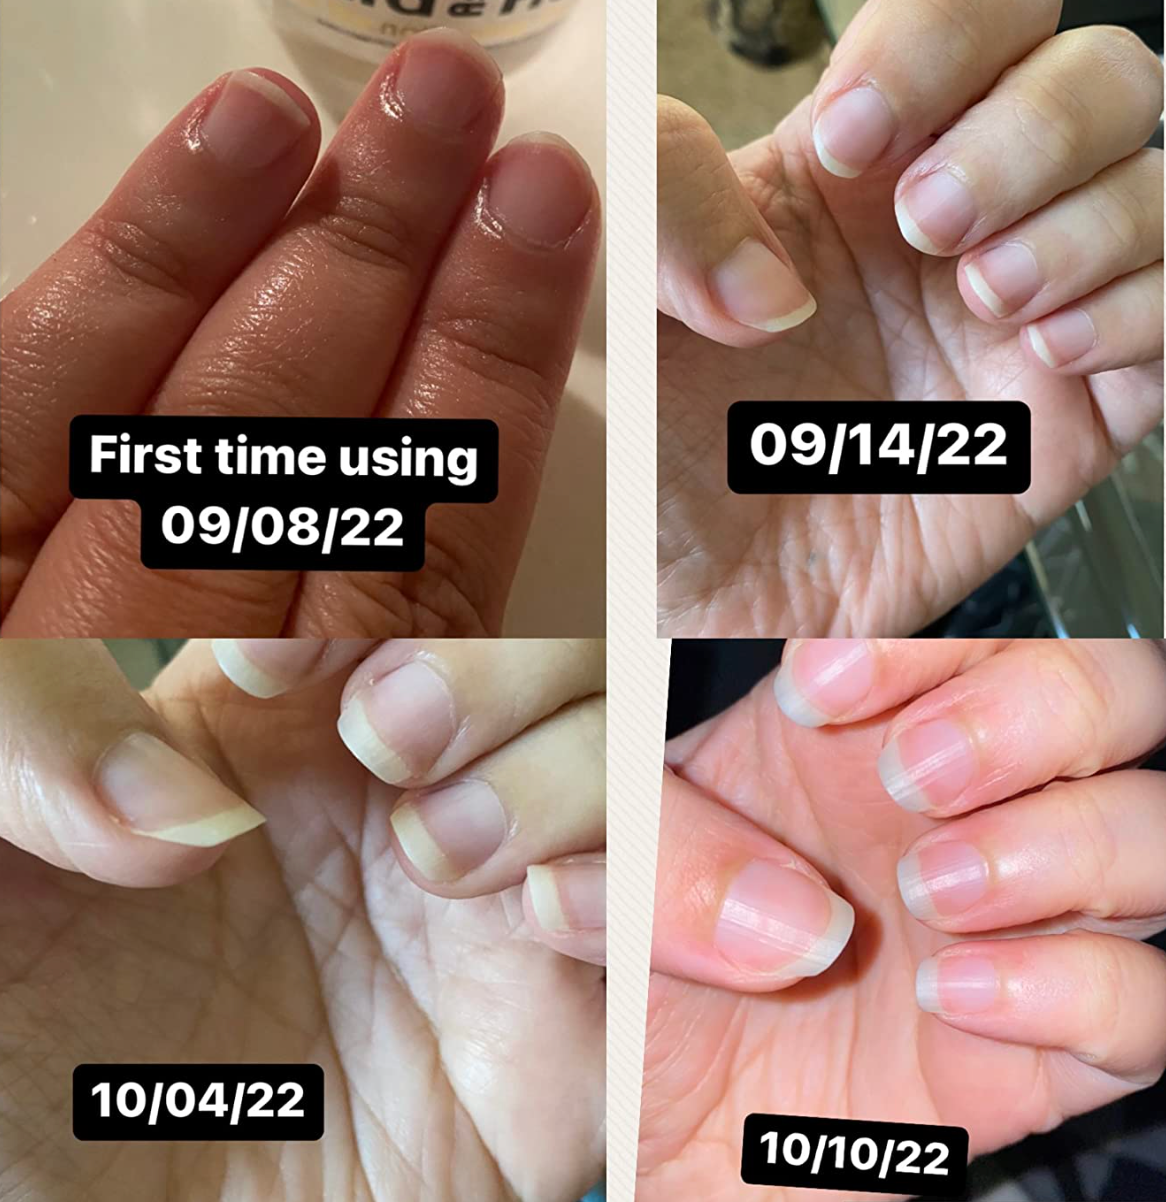 series of photos showing a reviewer's nails looking longer after using the strengthening cream